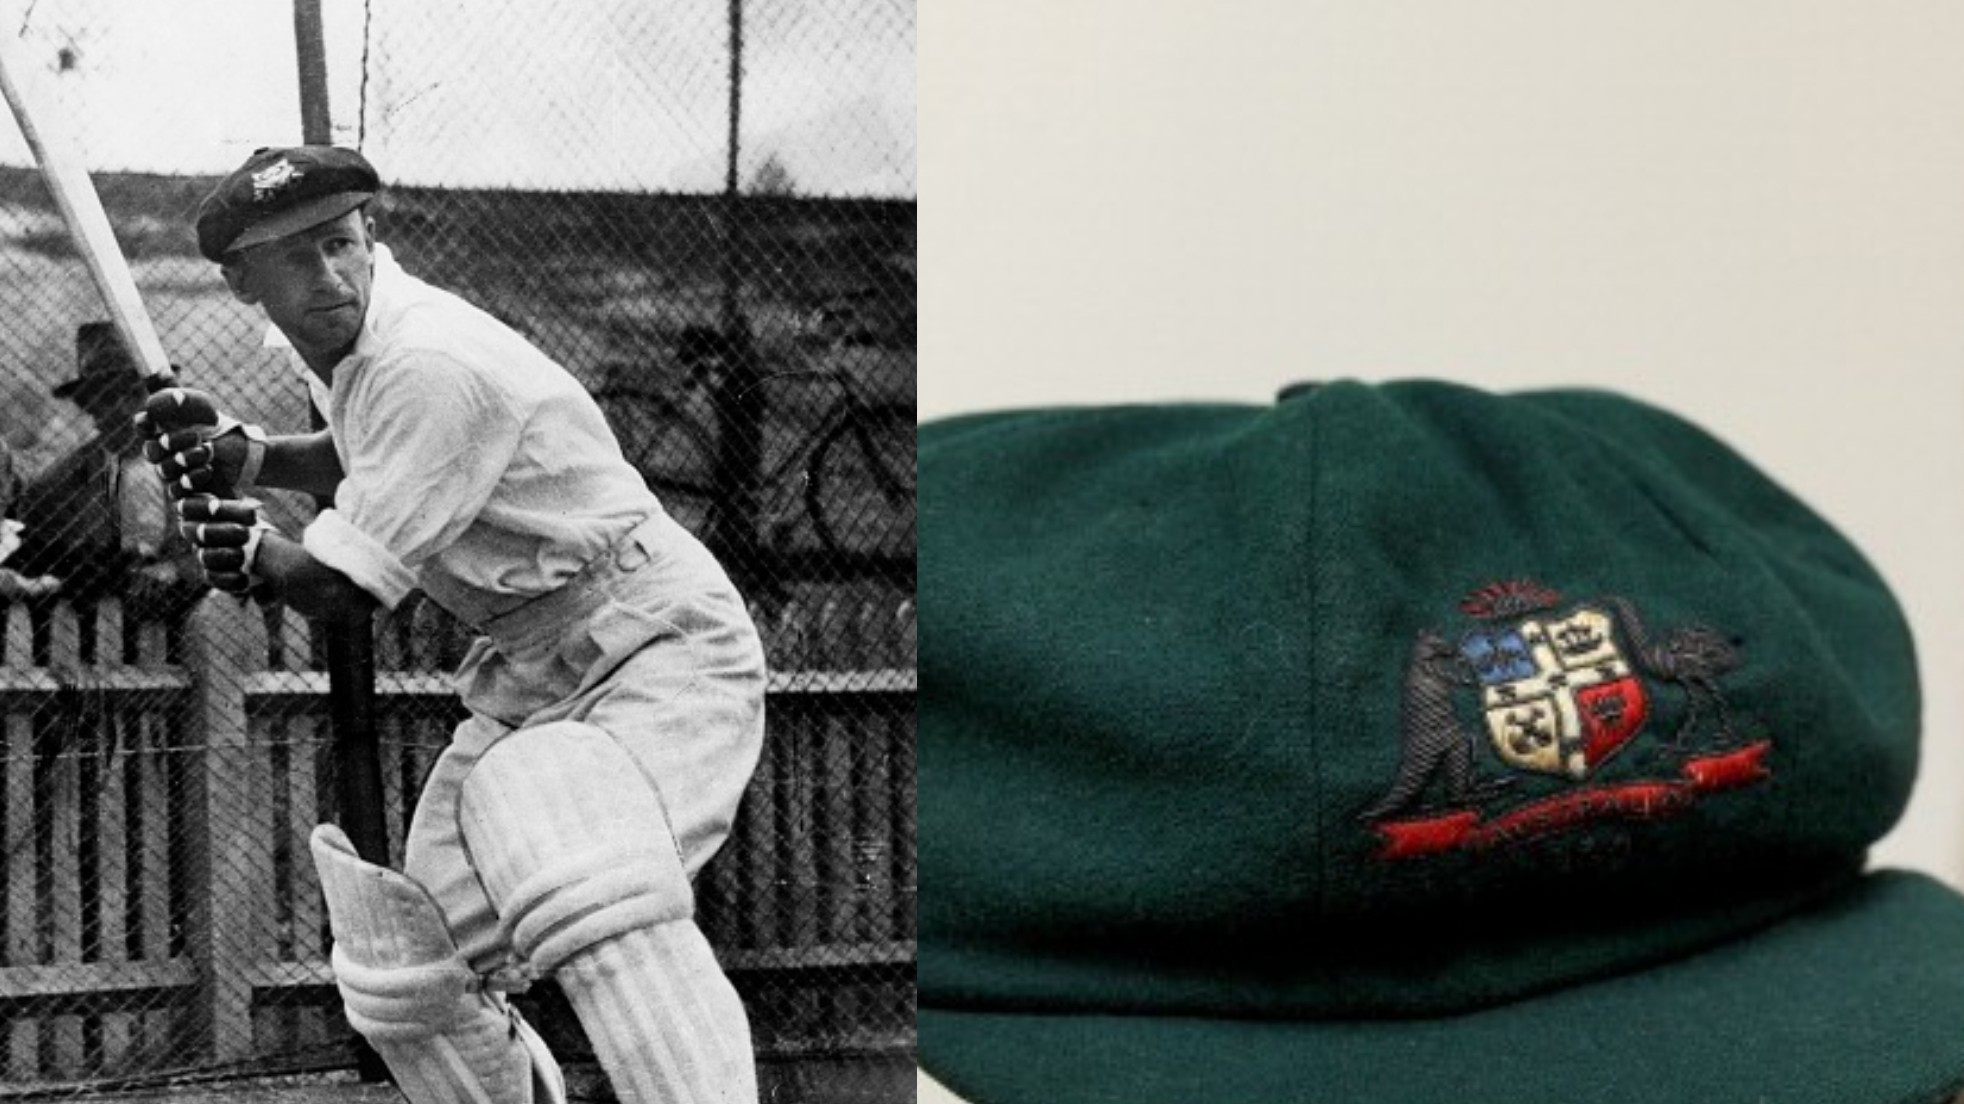 Sir Donald Bradman's 'baggy green' cap from his Test debut in 1928 up for auction